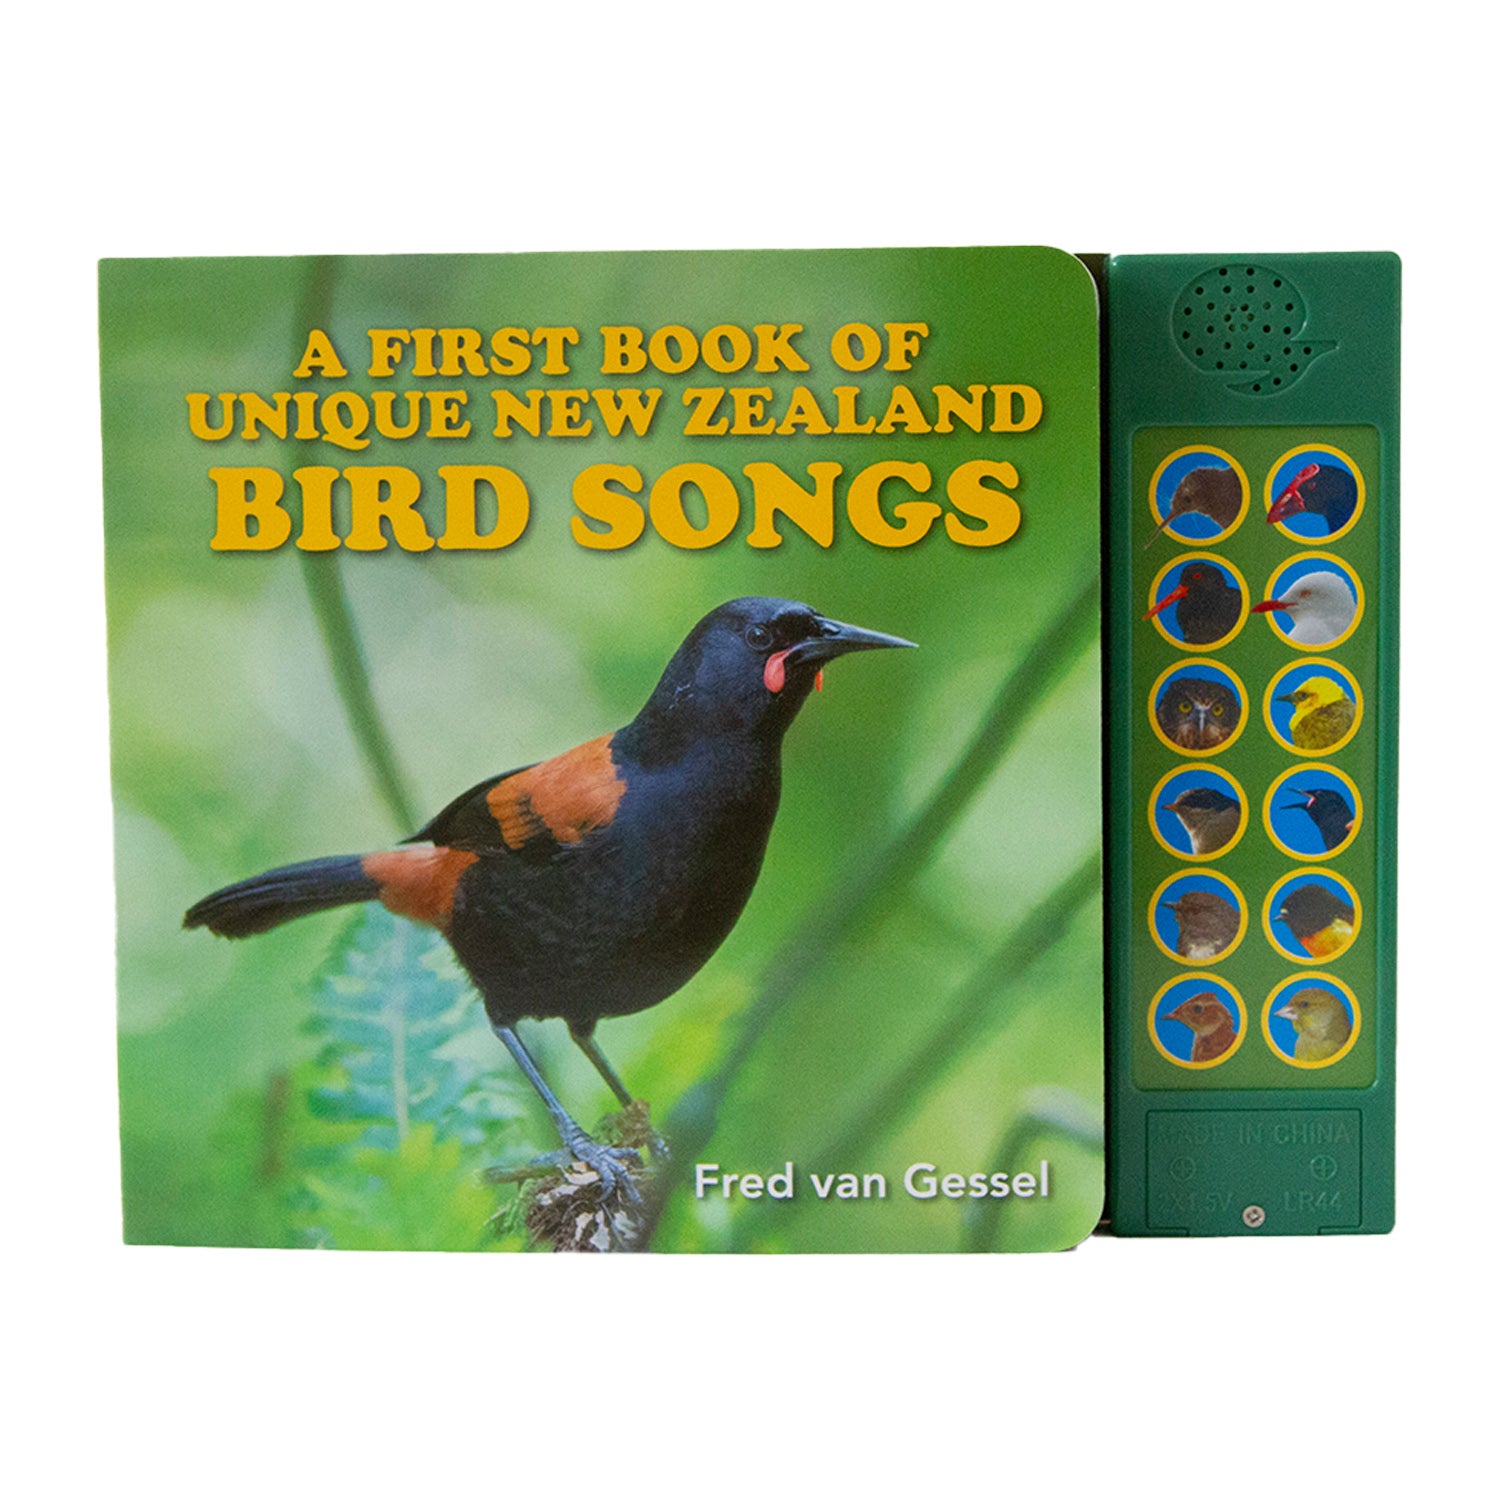 A First Book of Unique New Zealand Bird Songs